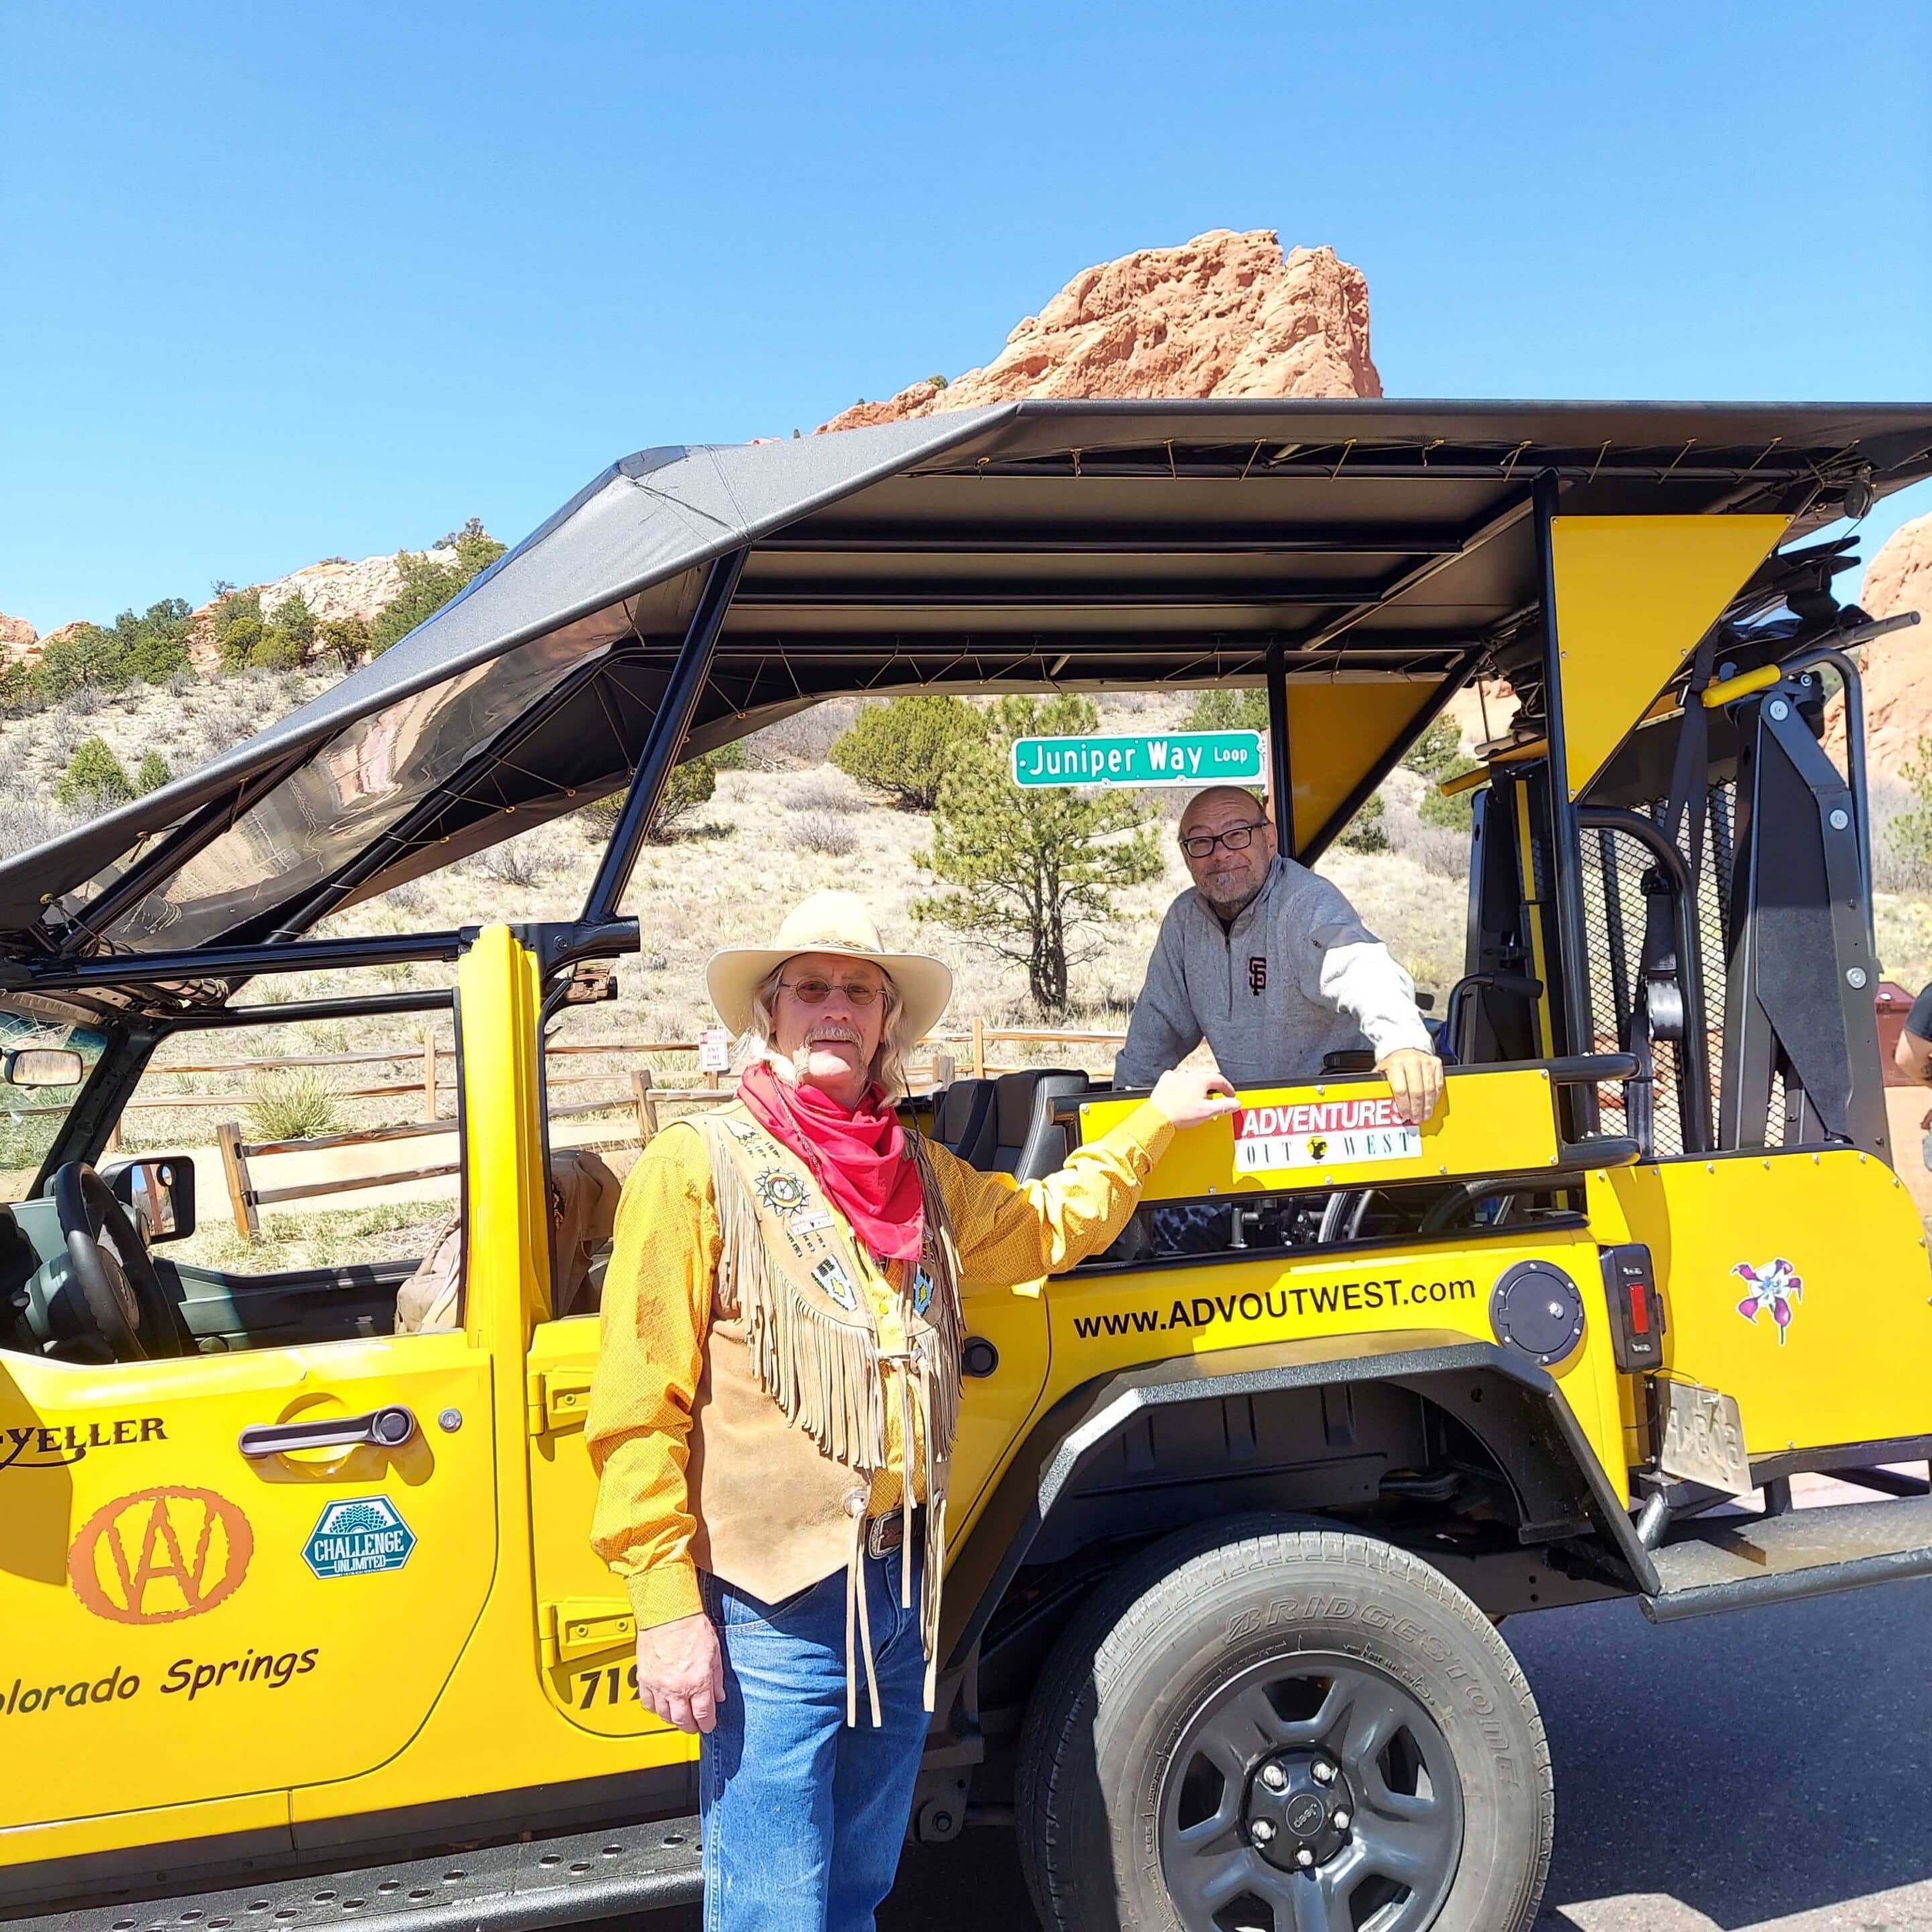 foothills jeep tour - Cheyenne Canyon Colorado Springs